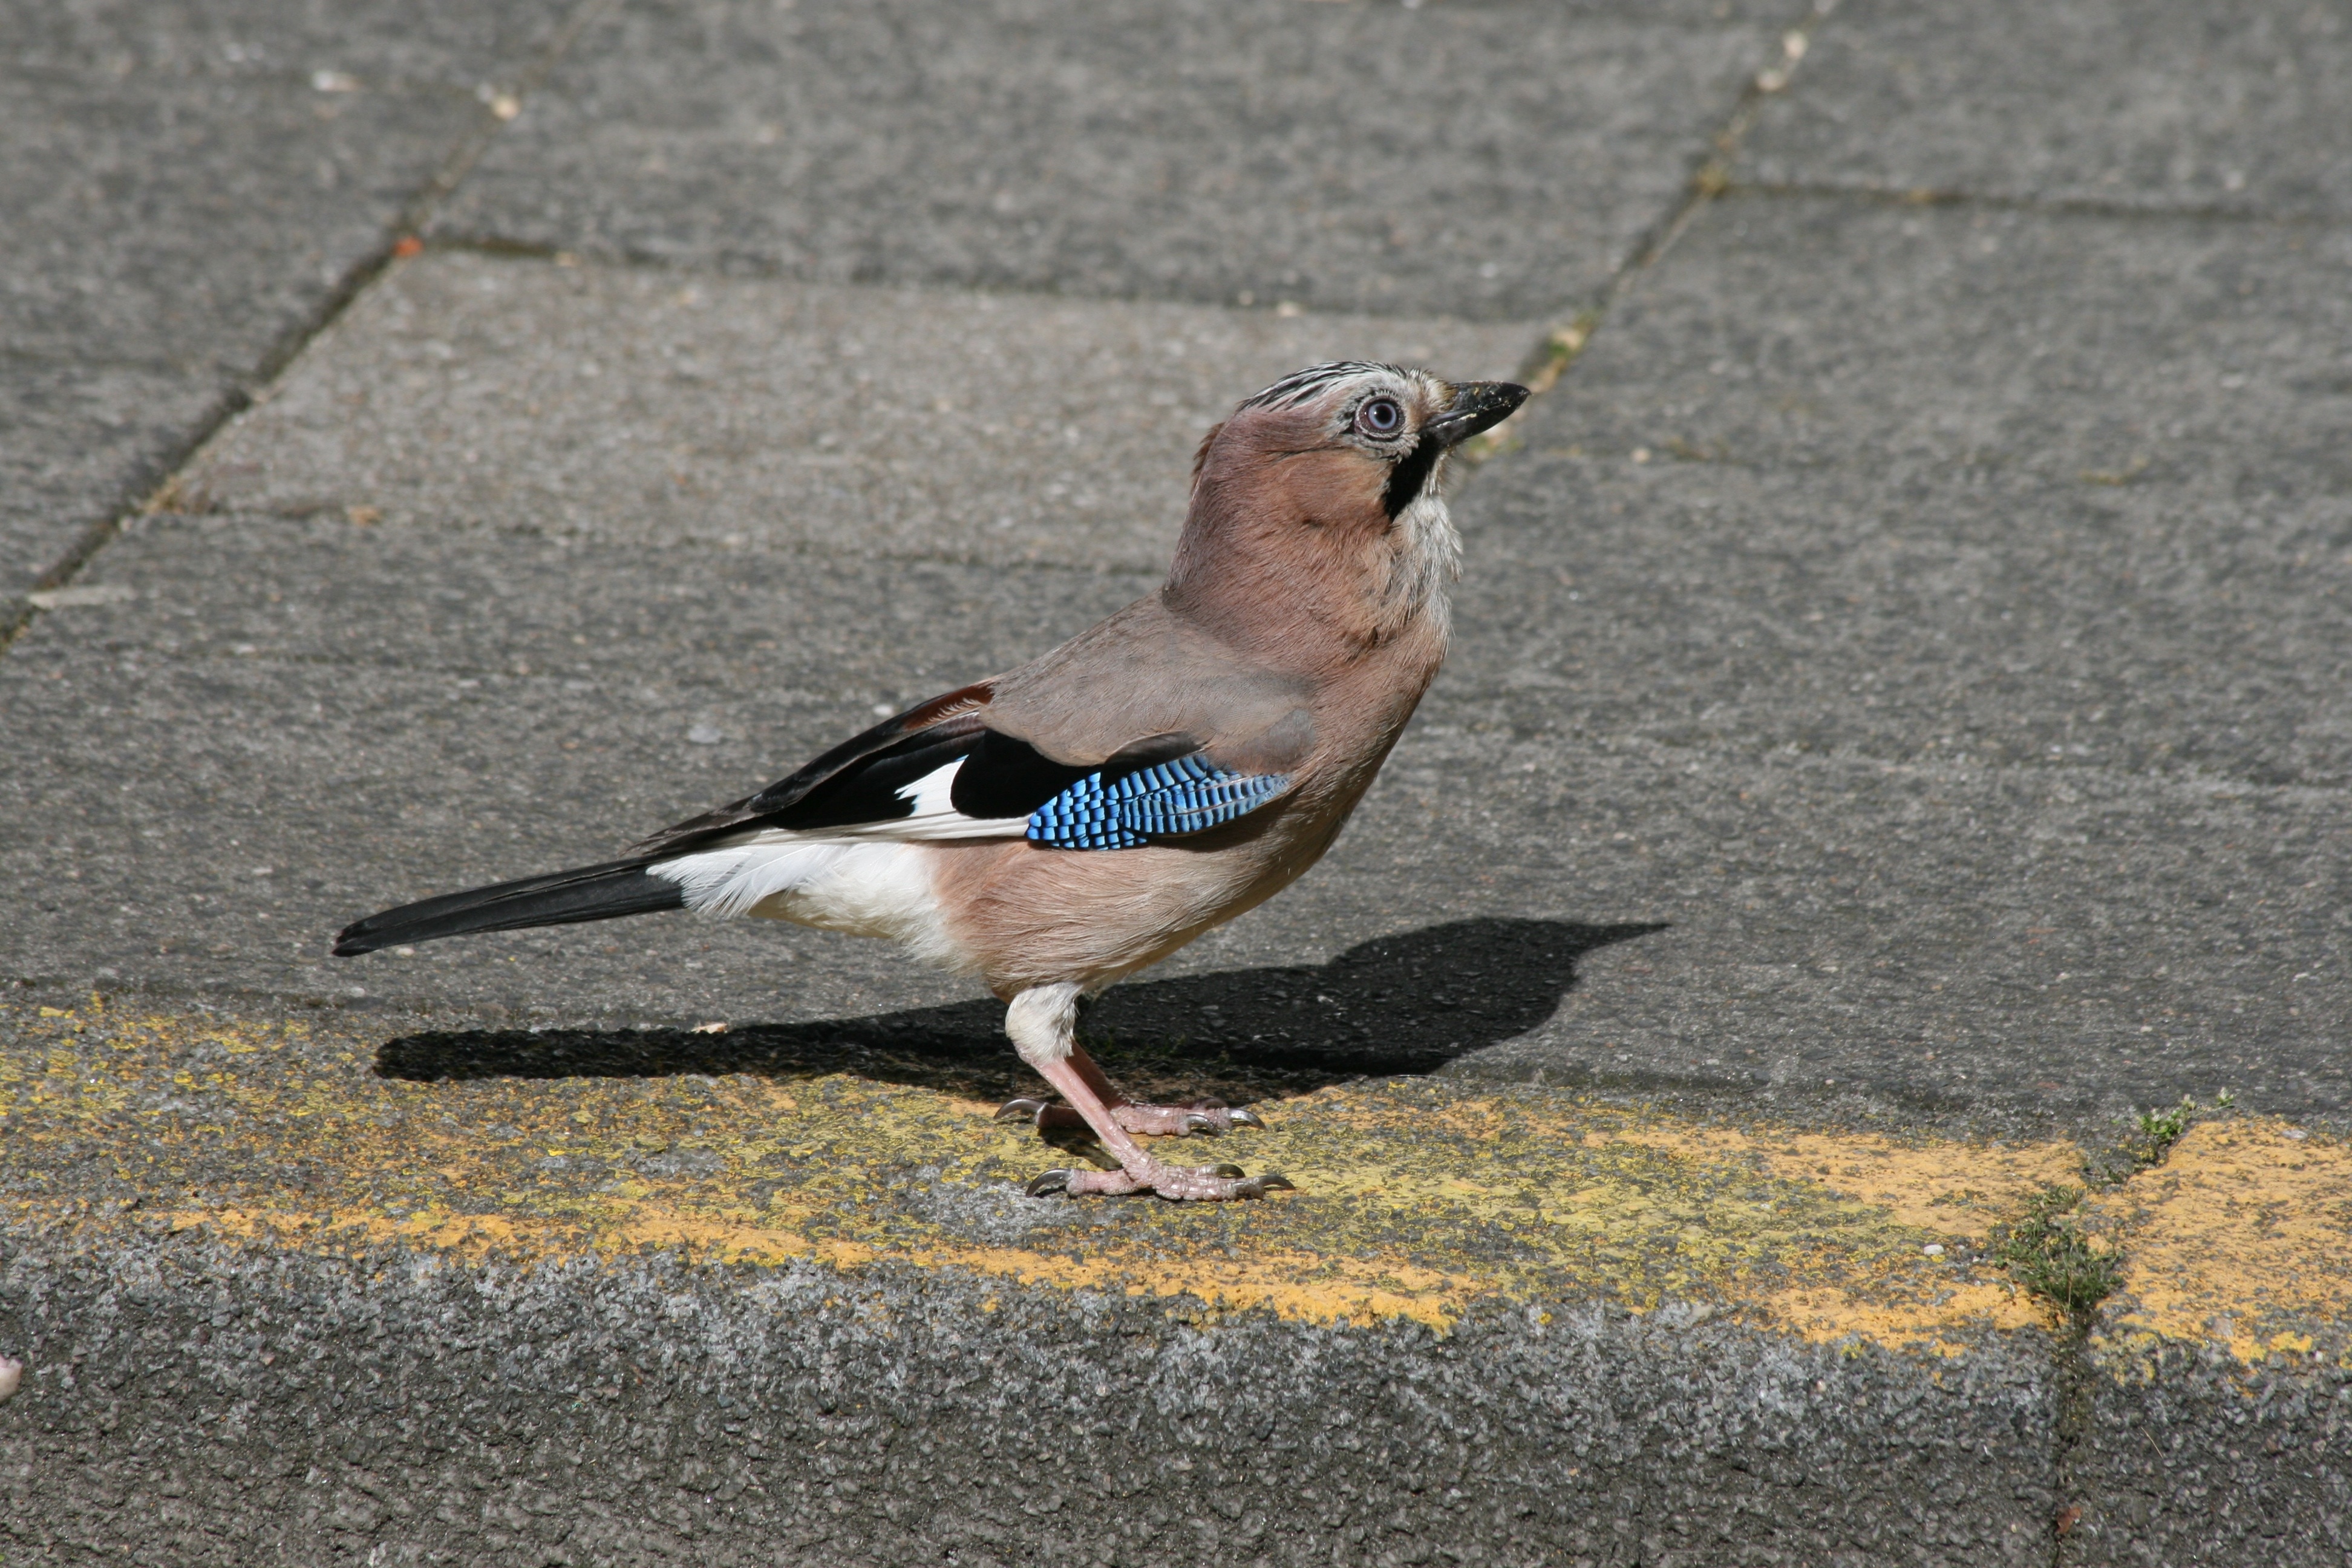 brown and blue bird